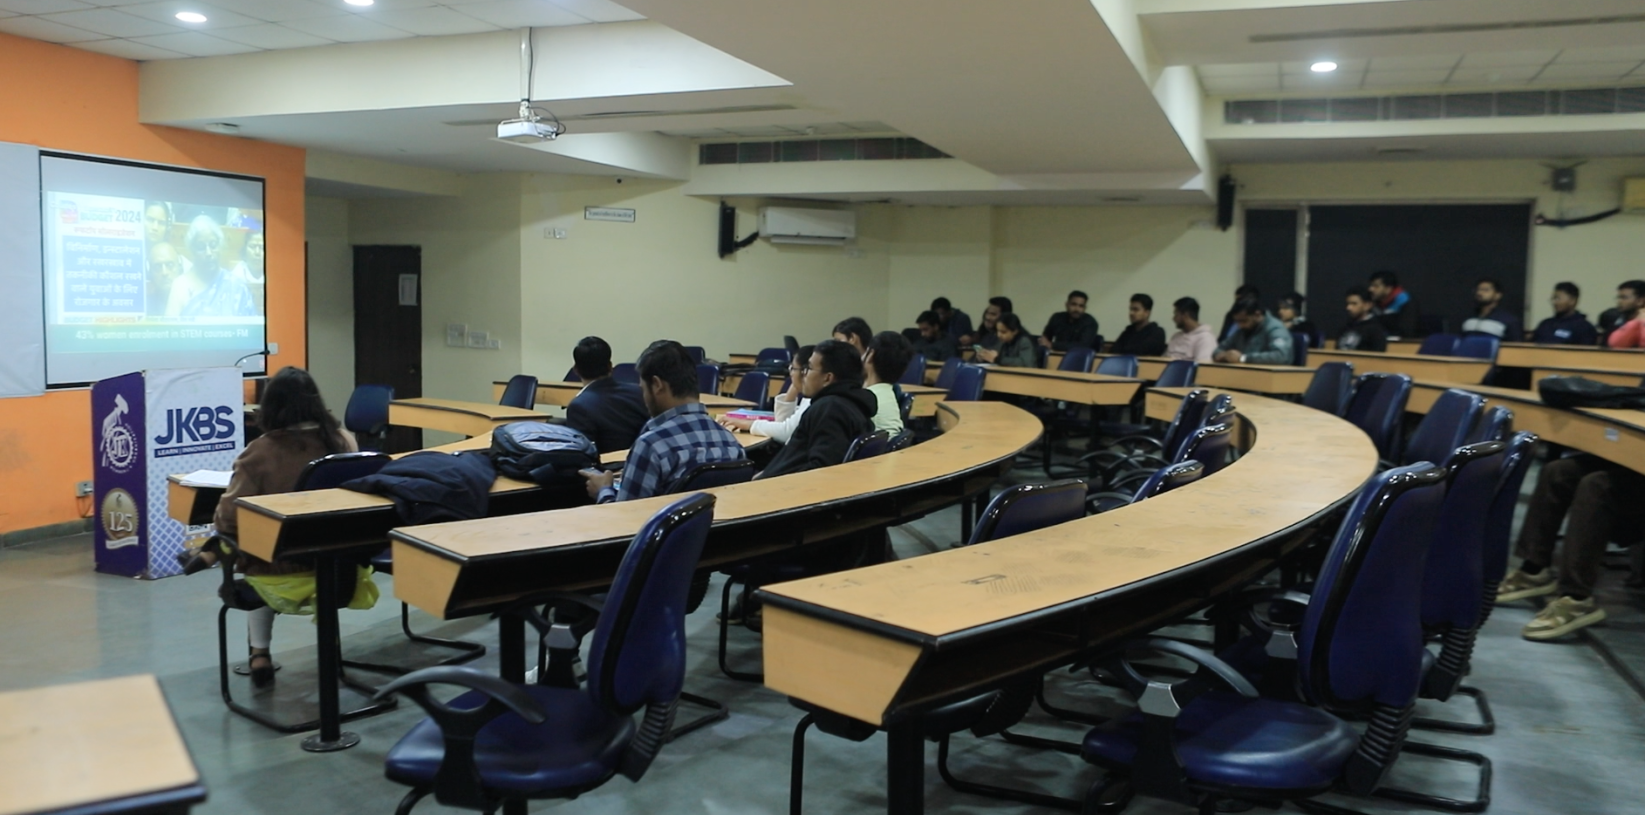 Understanding Policy and Finance: A Live Budget Experience for JKBS Students